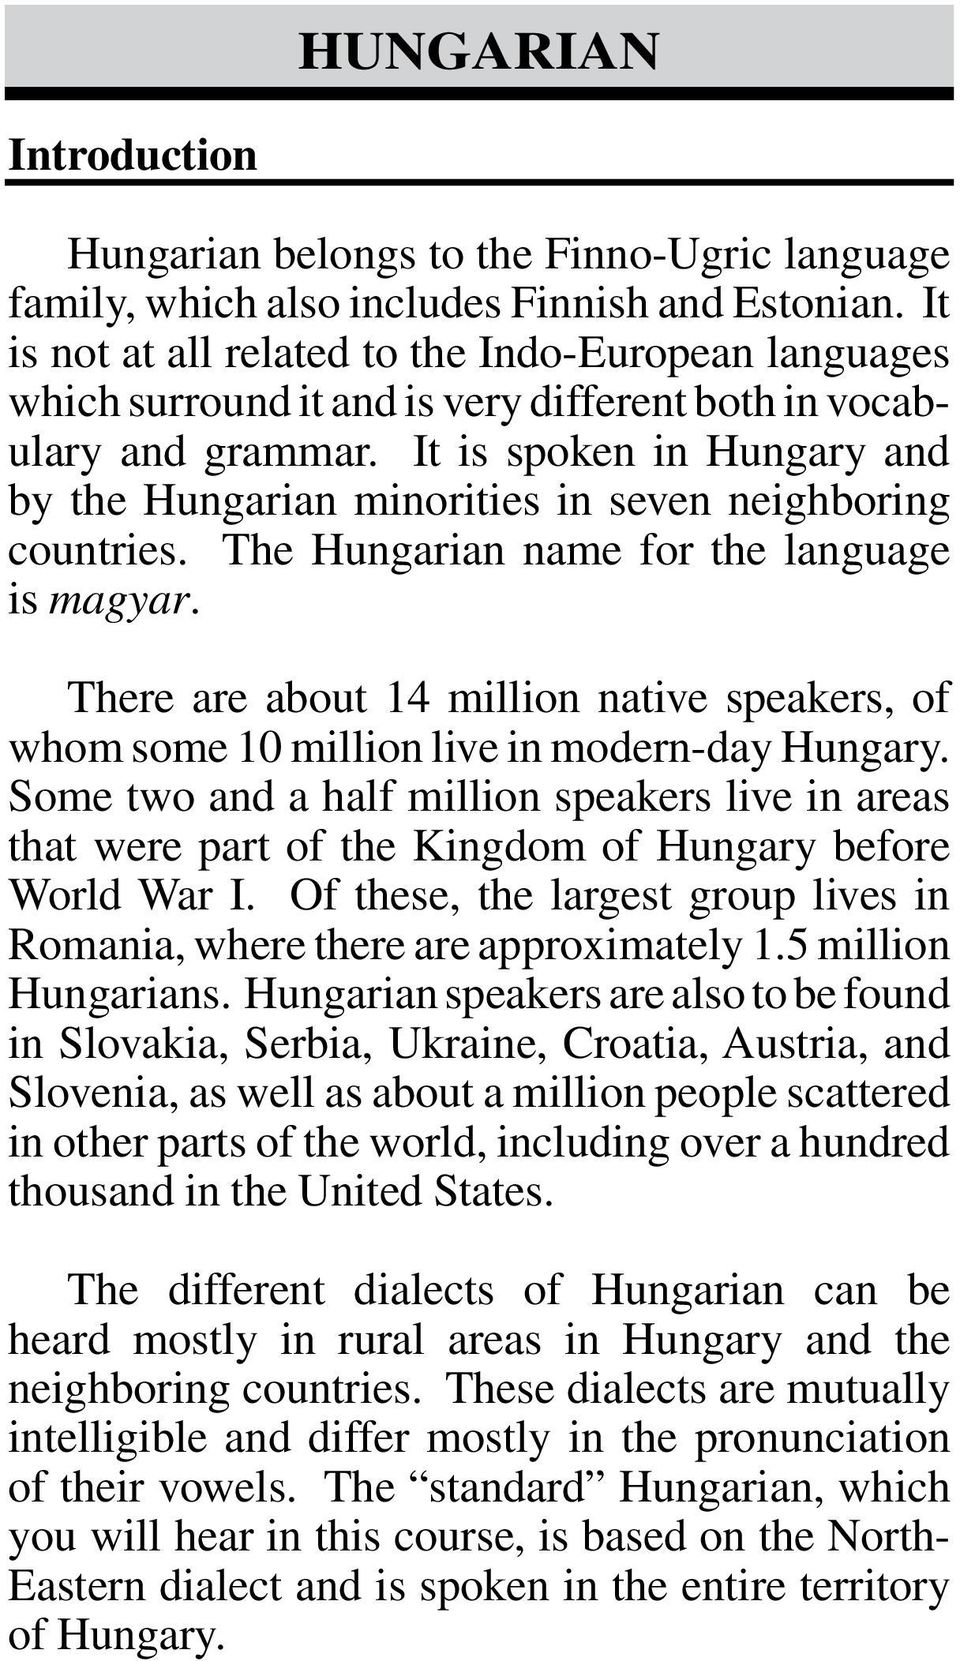 It is spoken in Hungary and by the Hungarian minorities in seven neighboring countries. The Hungarian name for the language is magyar.